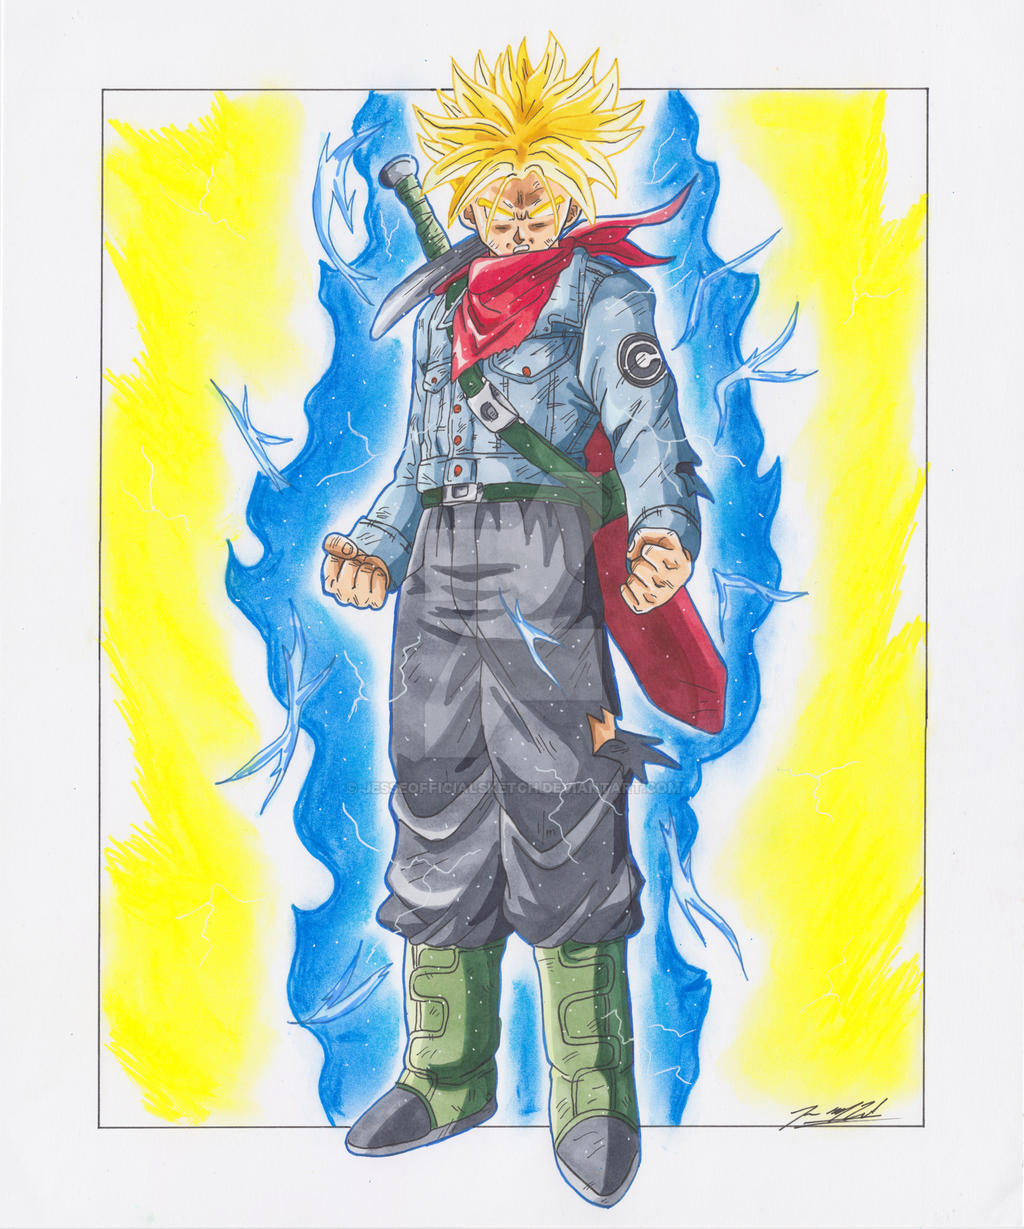 How Powerful Is Dragon Ball's Super Saiyan Rage - Is It Trunks' Final Form?